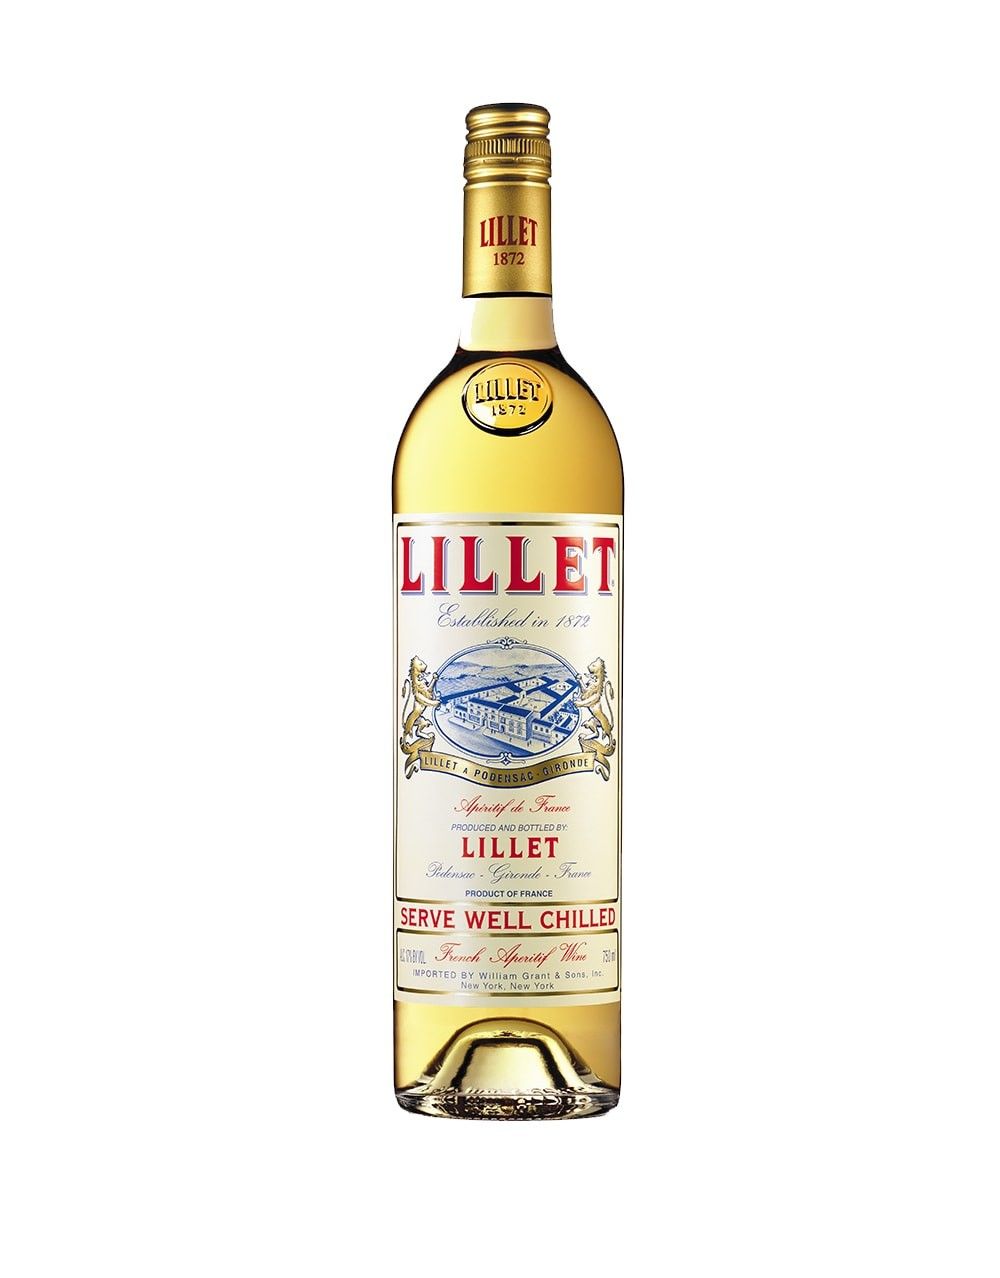 Lillet Blanc | Buy Online or Send as a Gift | ReserveBar